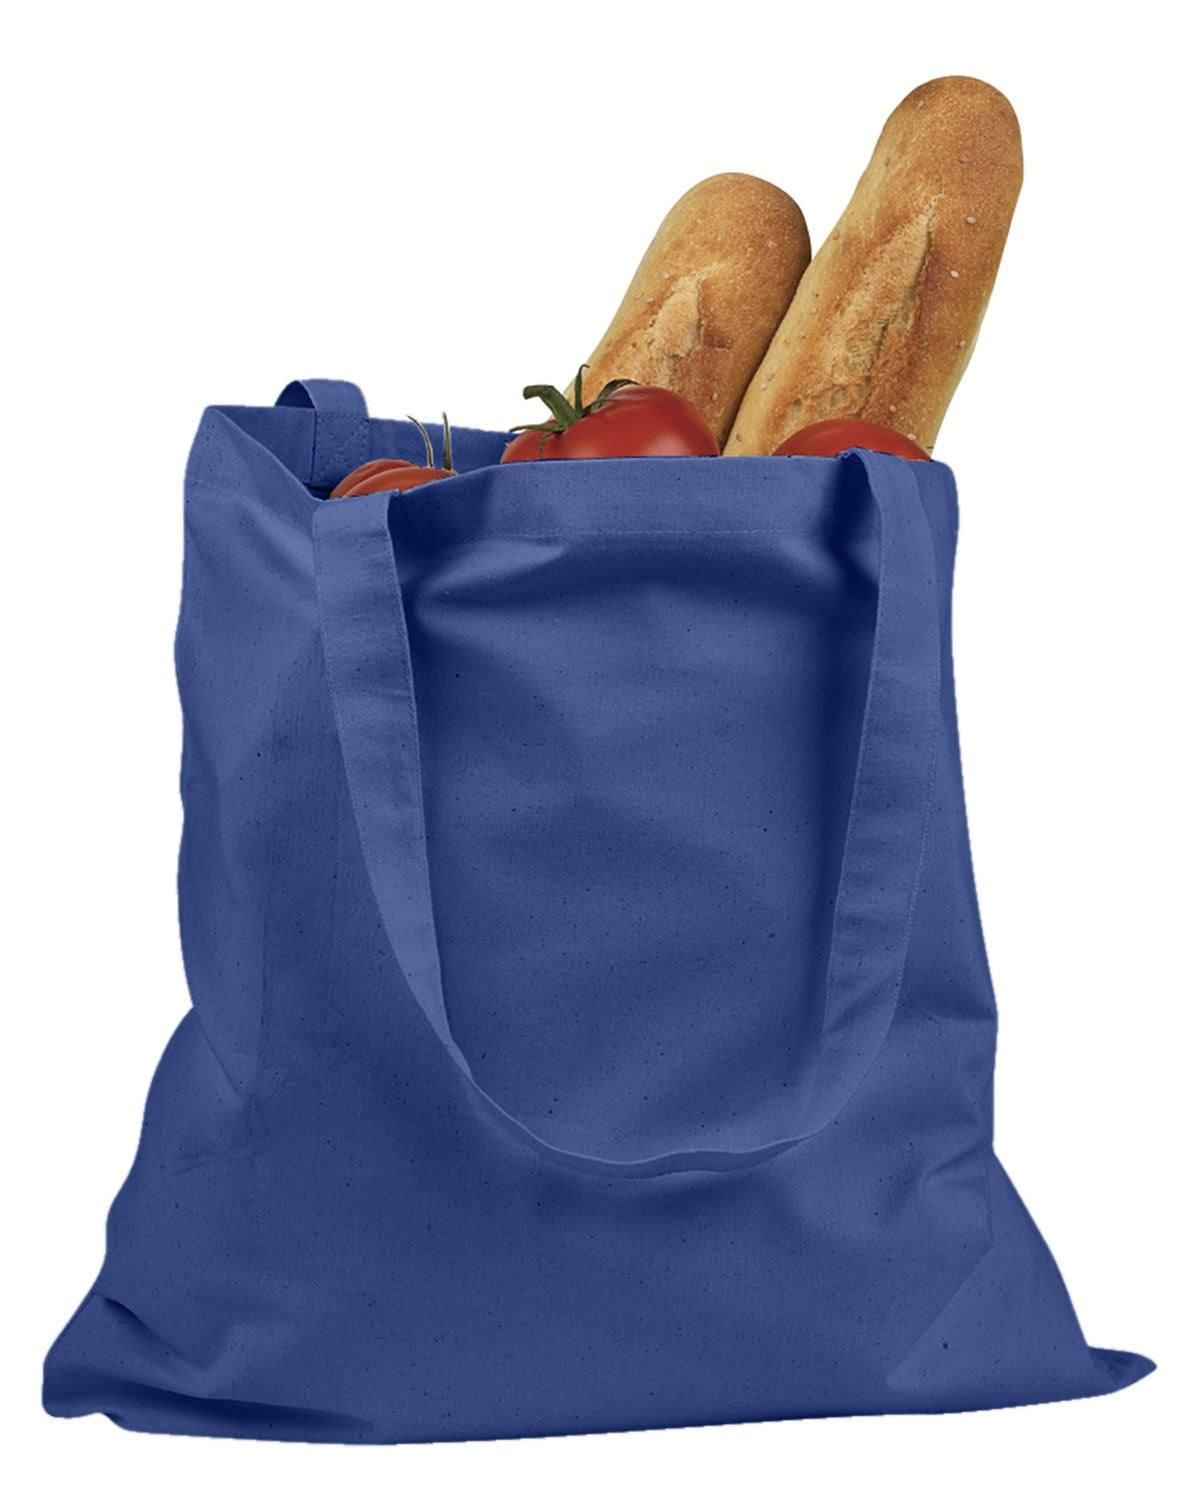 Royal Blue tote pictured.